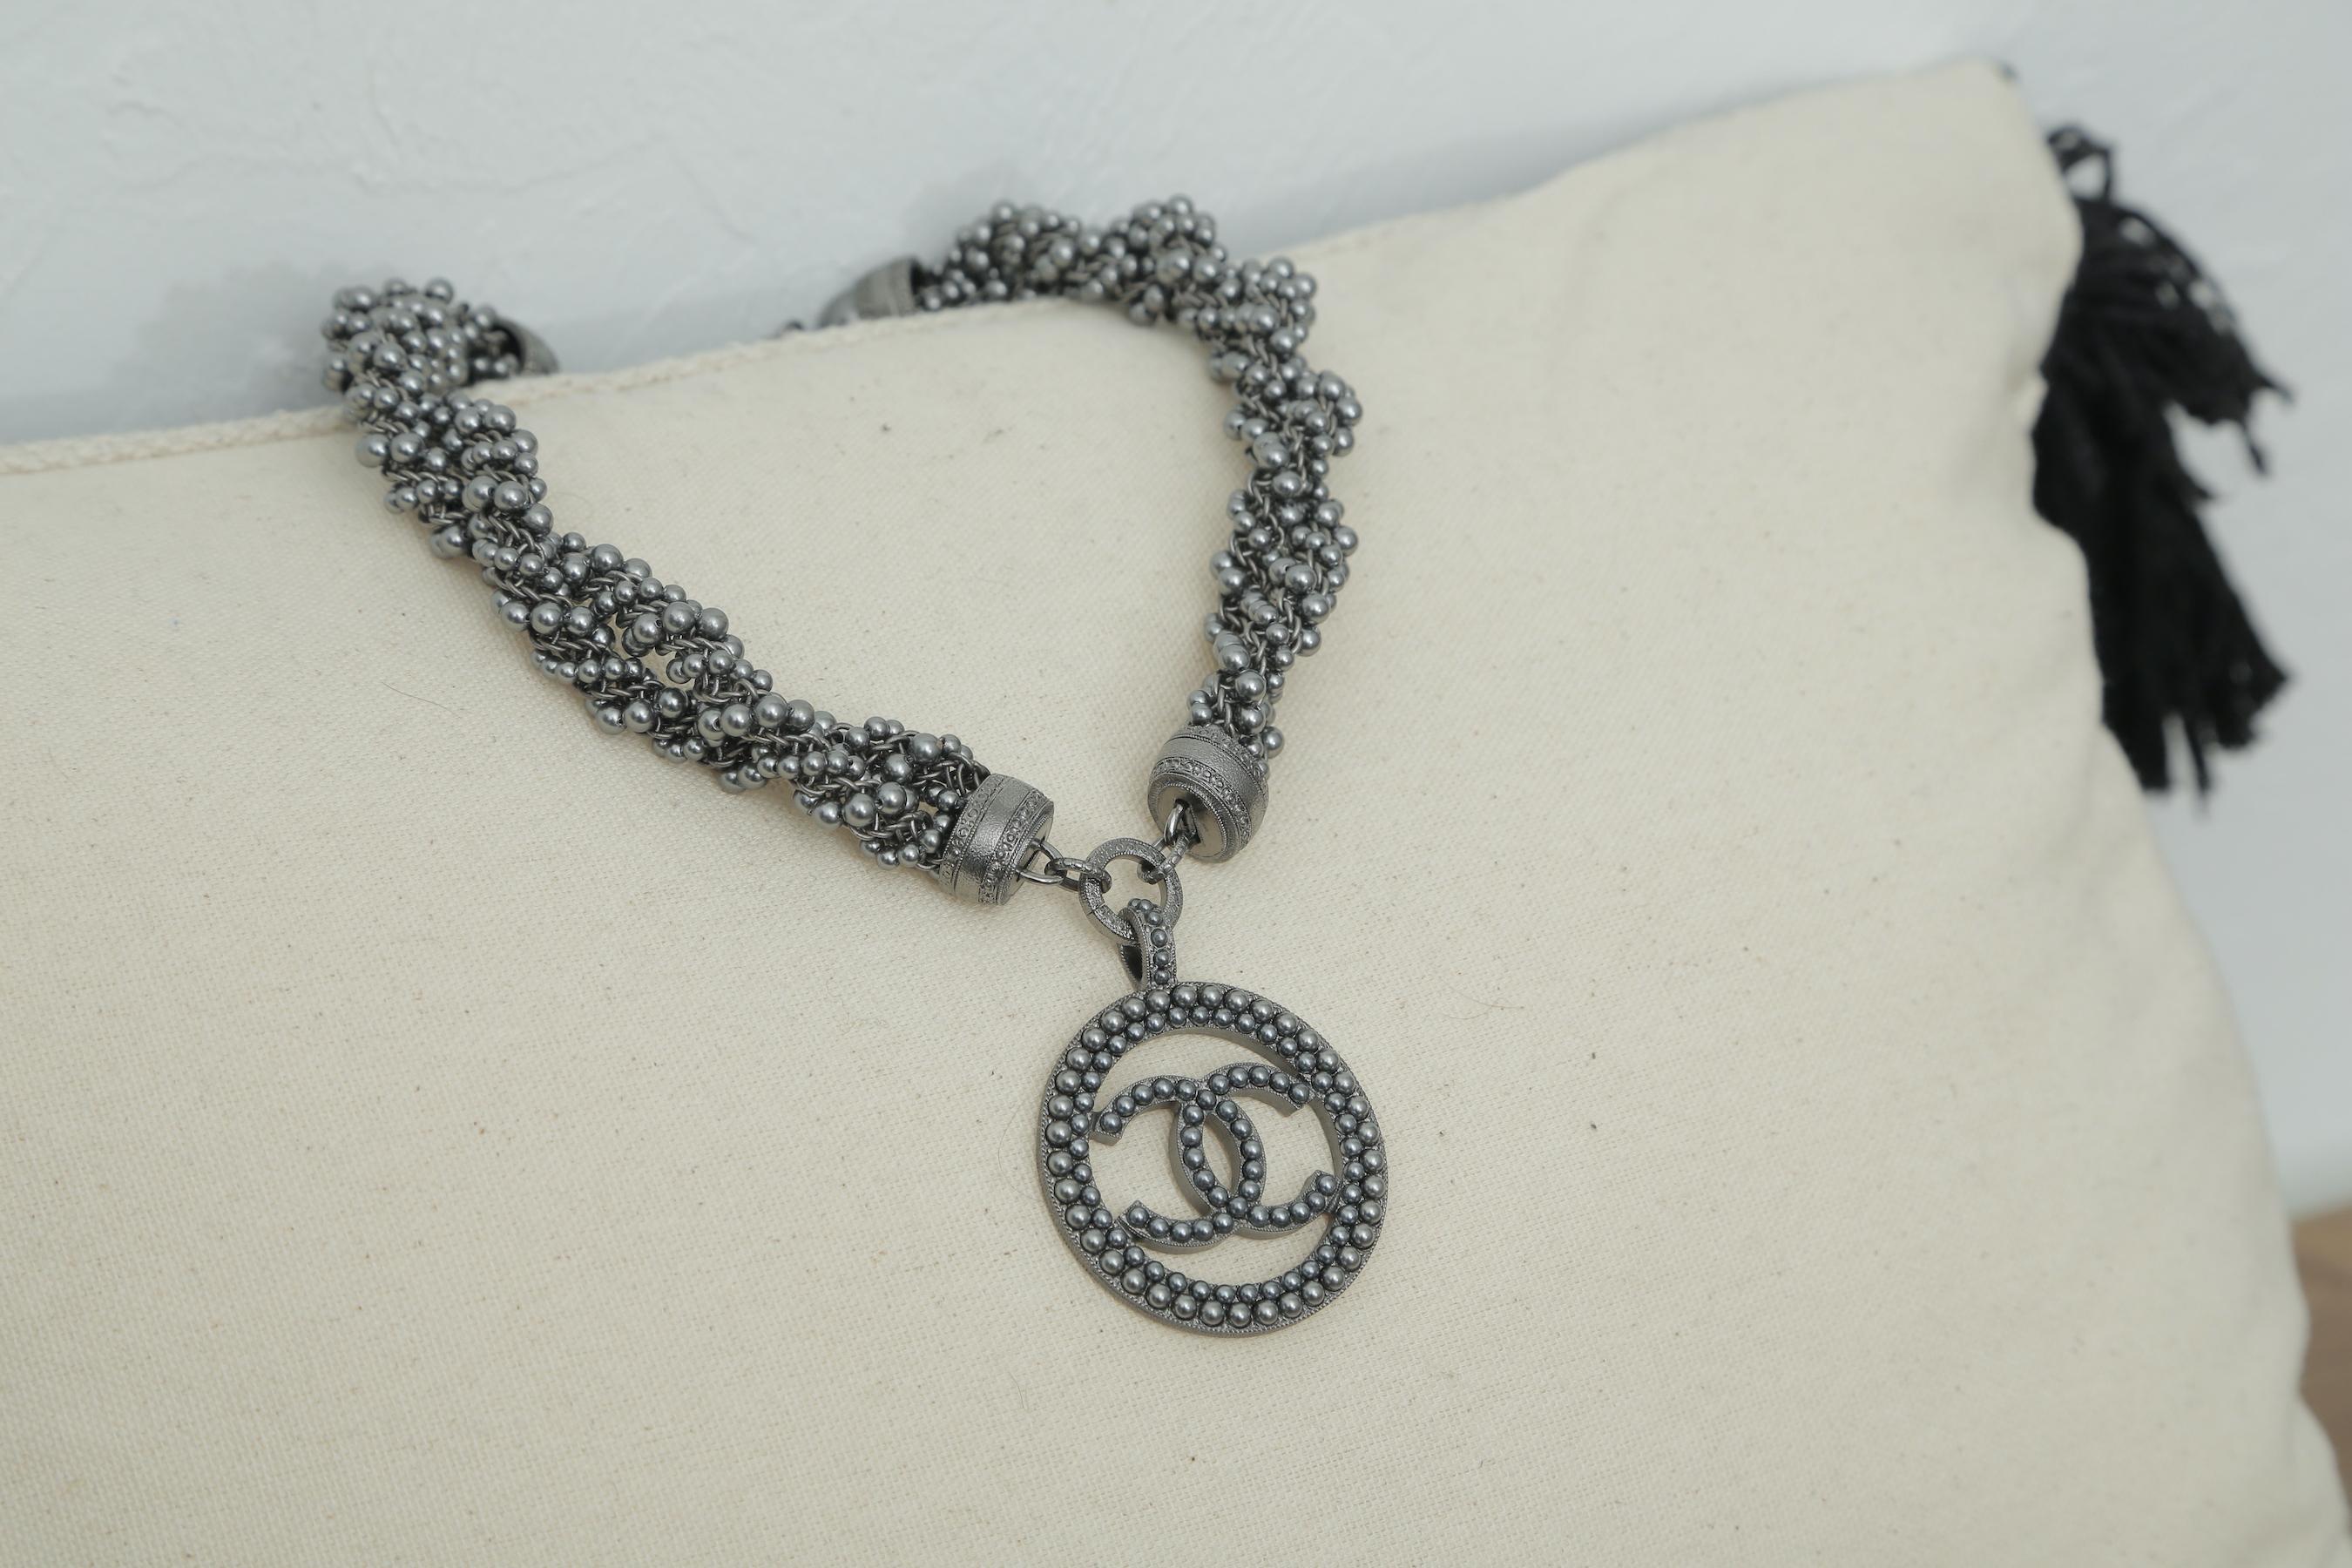 Chanel grey beaded crystal CC chain choker with CC medallion pendant. This bold choker necklaces features multiple strands of faux dark pearls braided together. There is a large CC pendant at the front center and a smallCC dangling charm at the